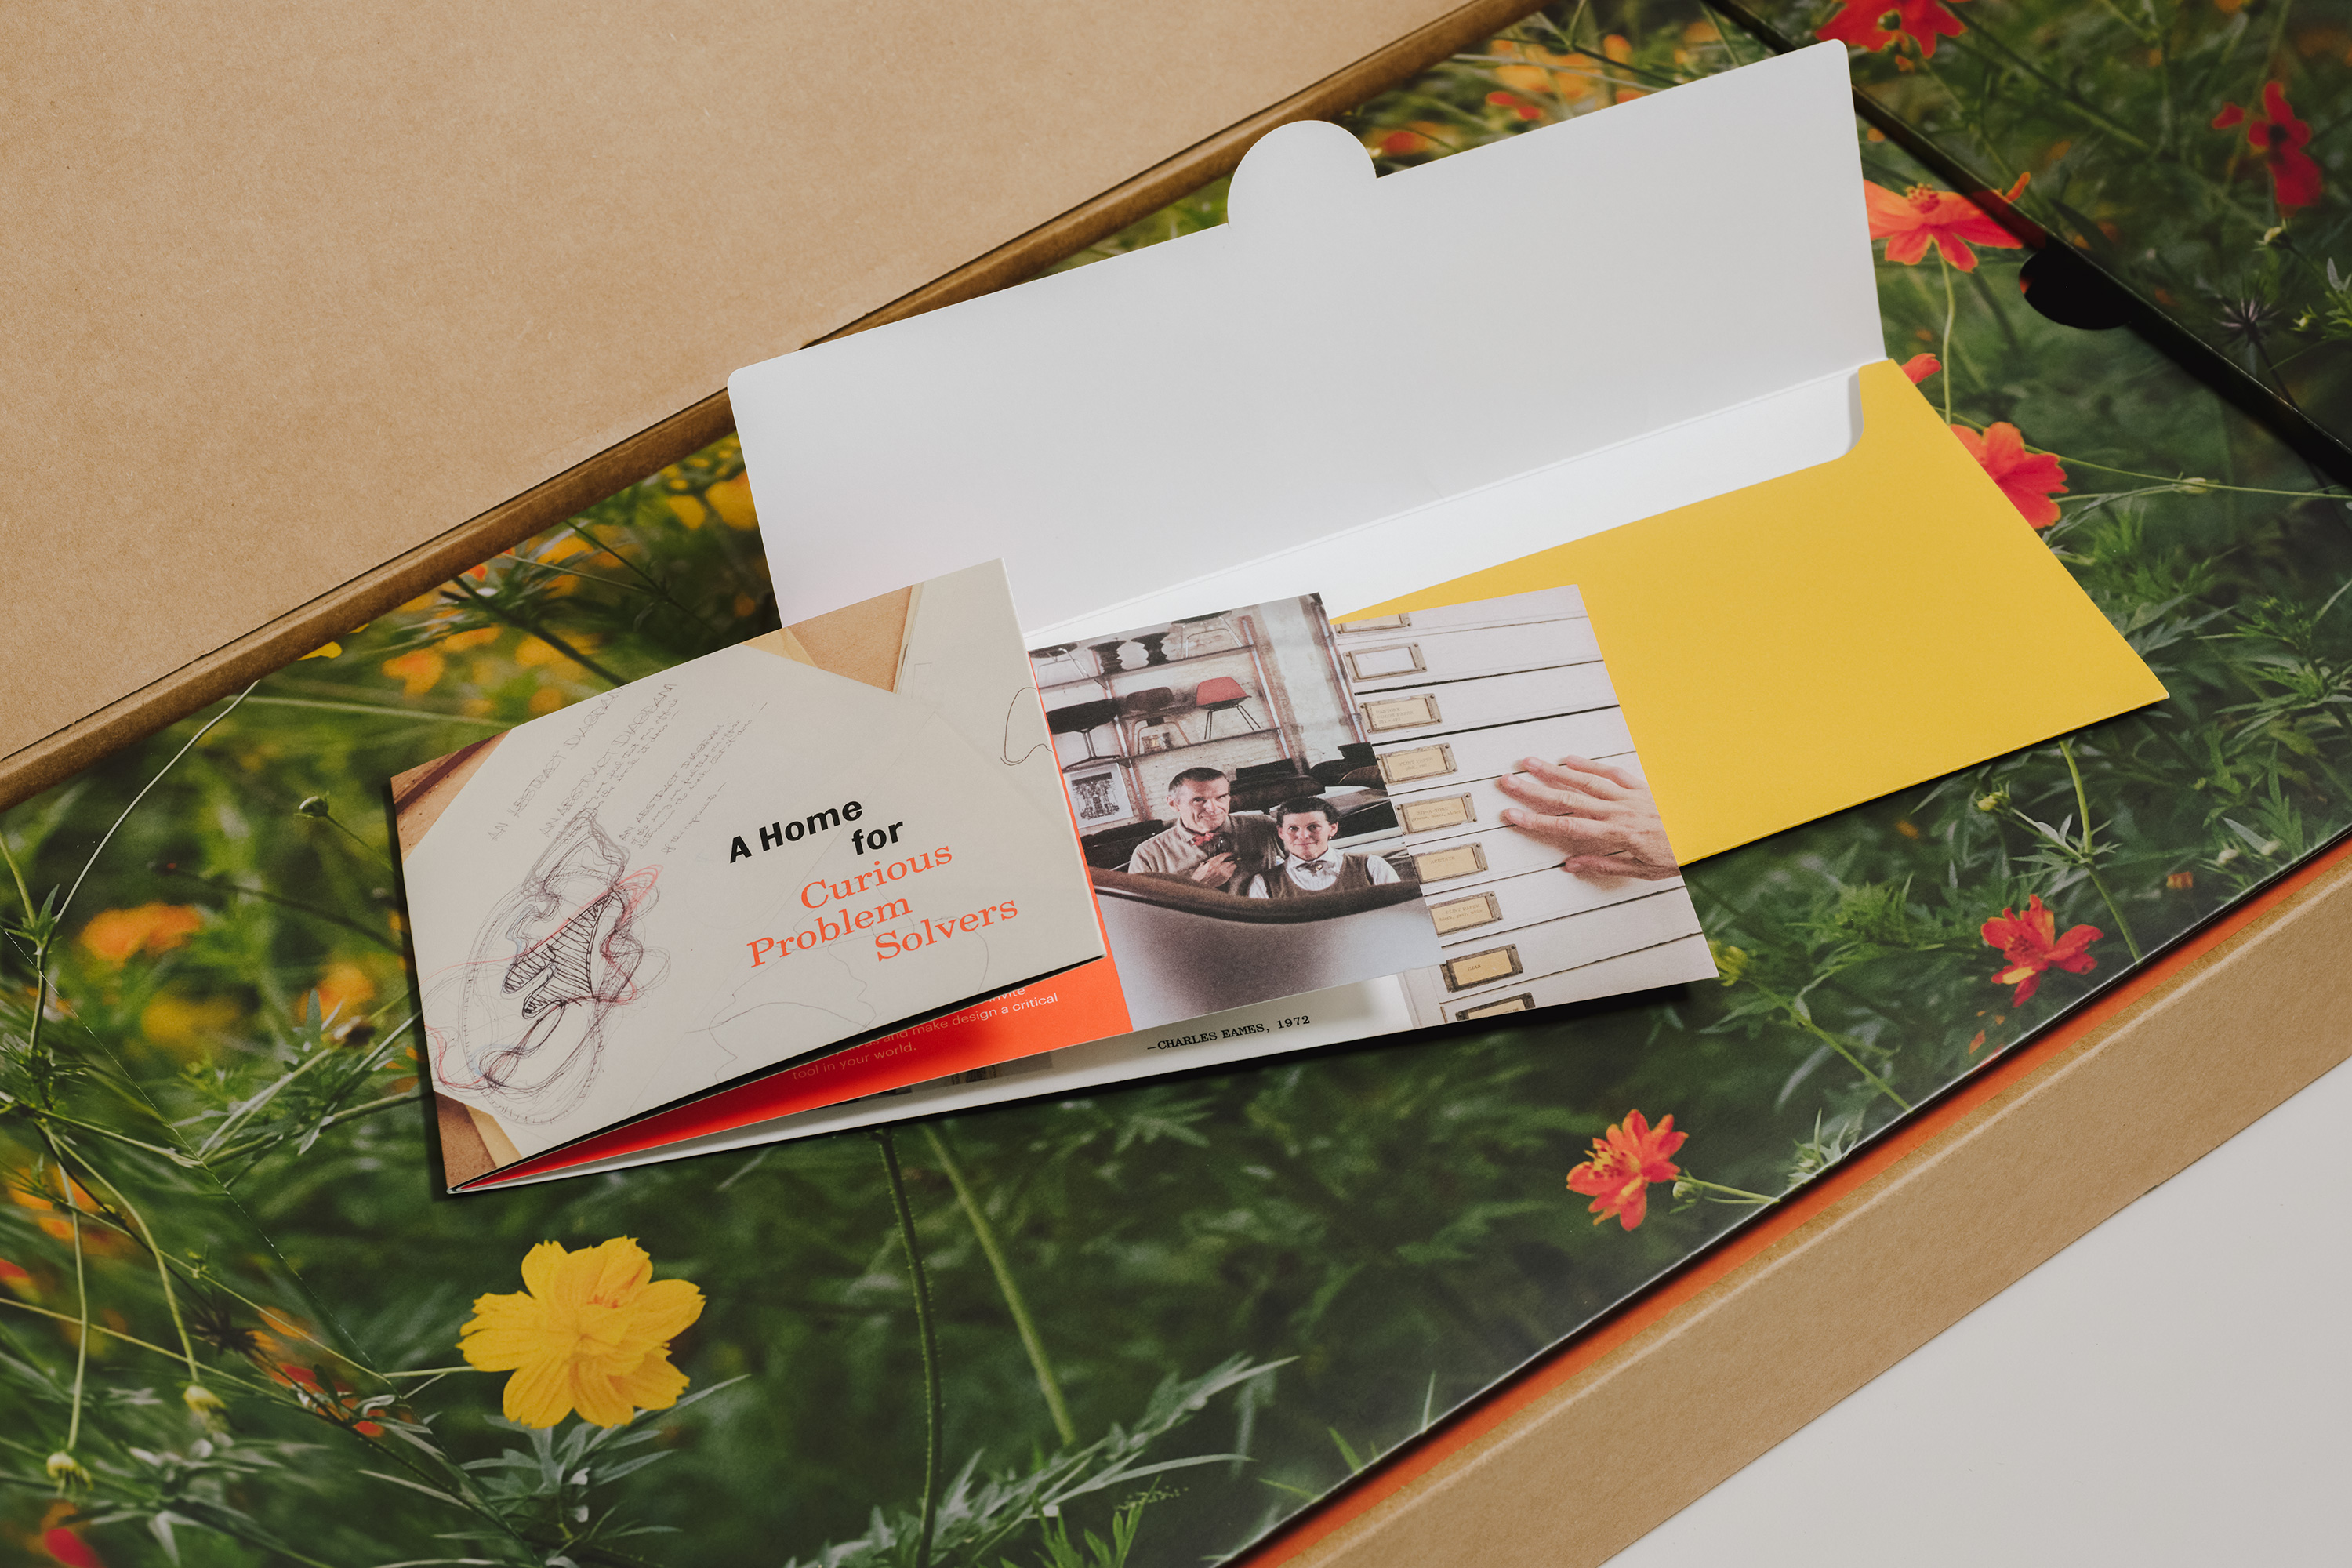 Welcome kit and brand identity designed by San Francisco-based studio Manual for The Eames Institute